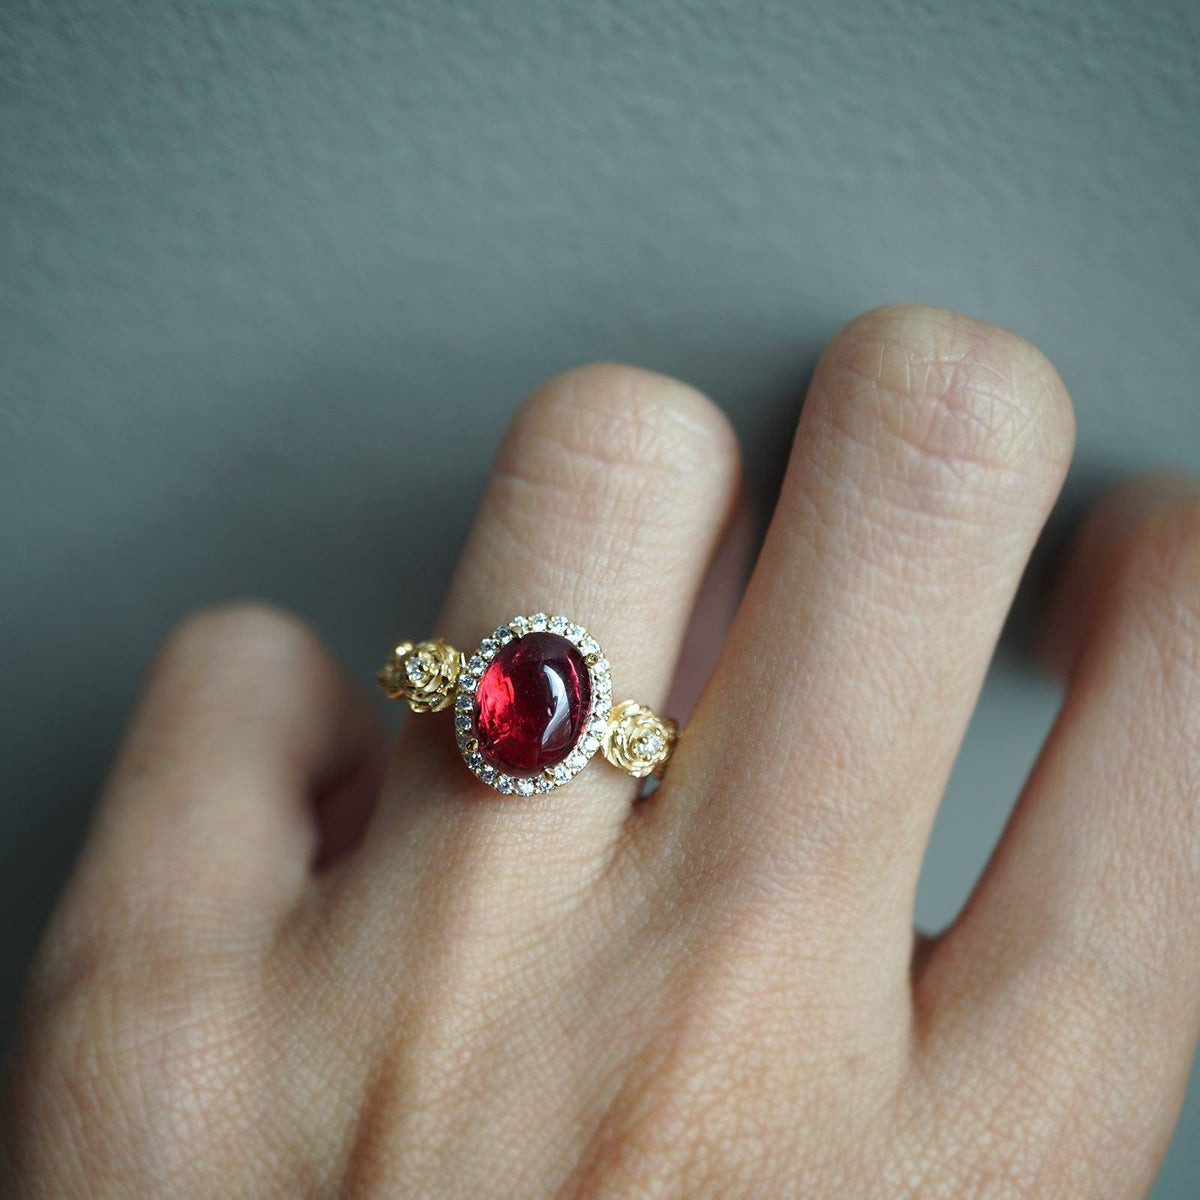 American Beauty Spinel Rose Diamond Ring